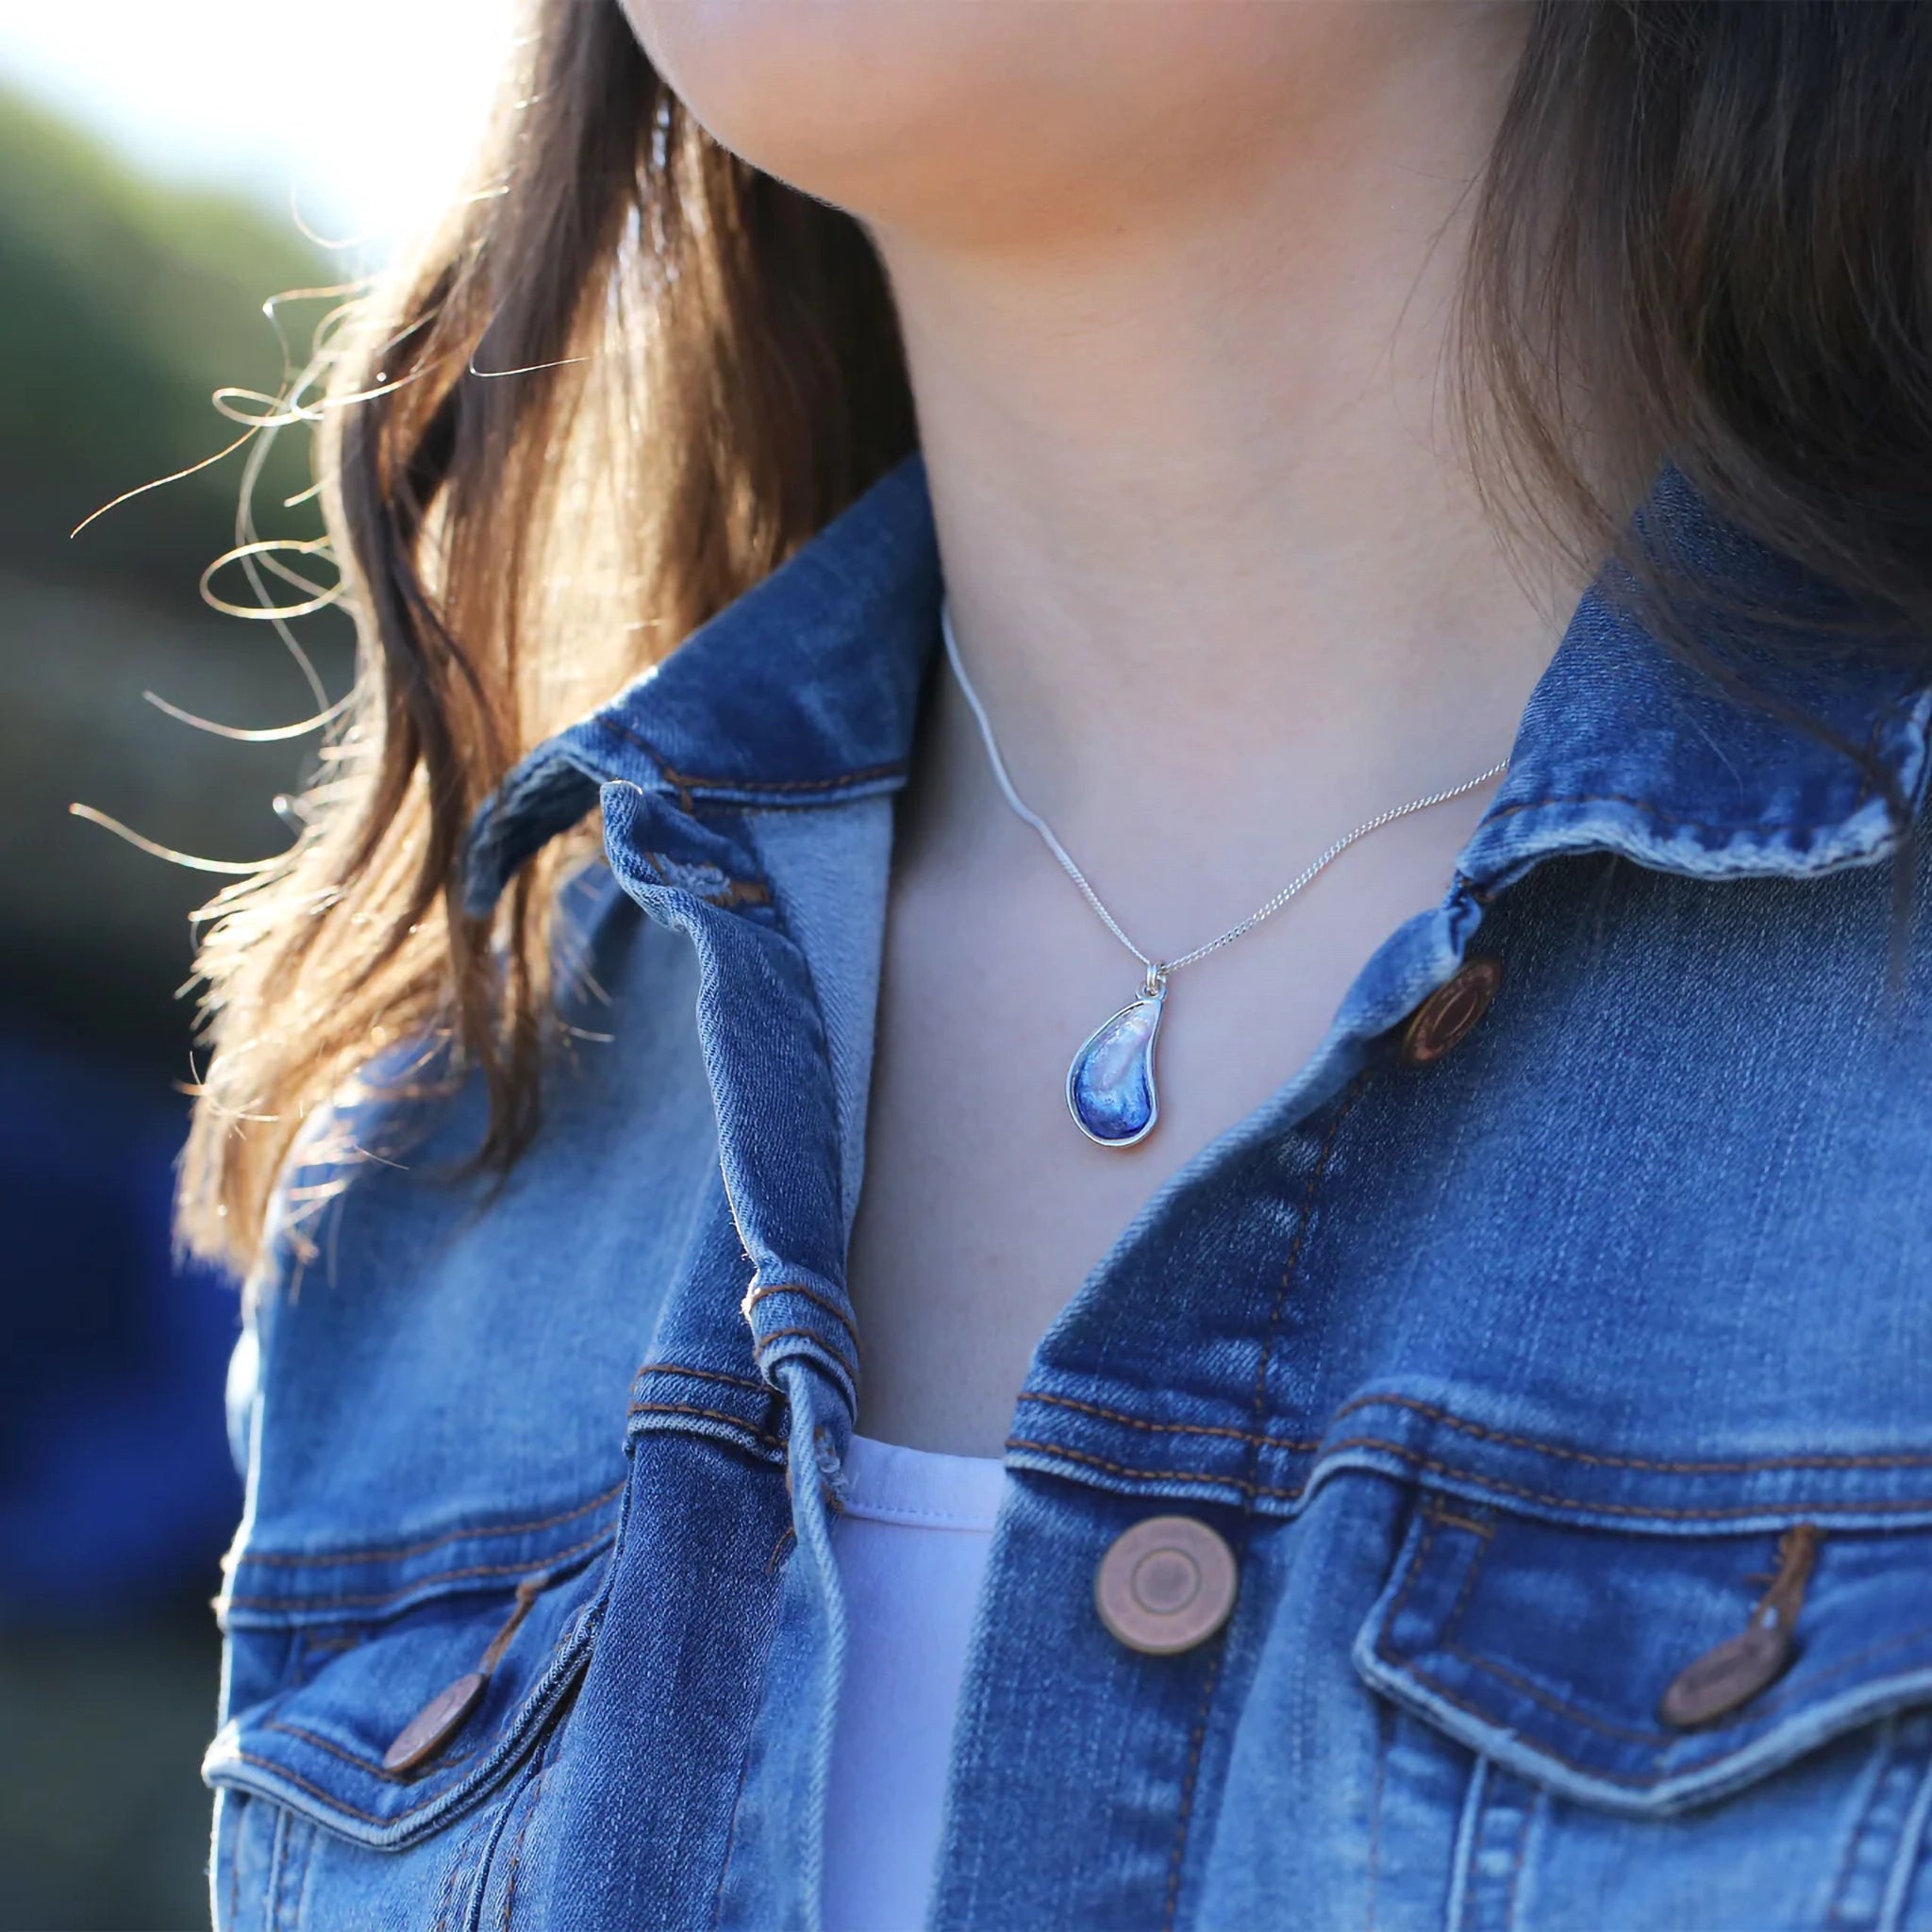 Model wearing silver pendant in the shape of a mussel with a pearly white and blue enamel, on a silver chain